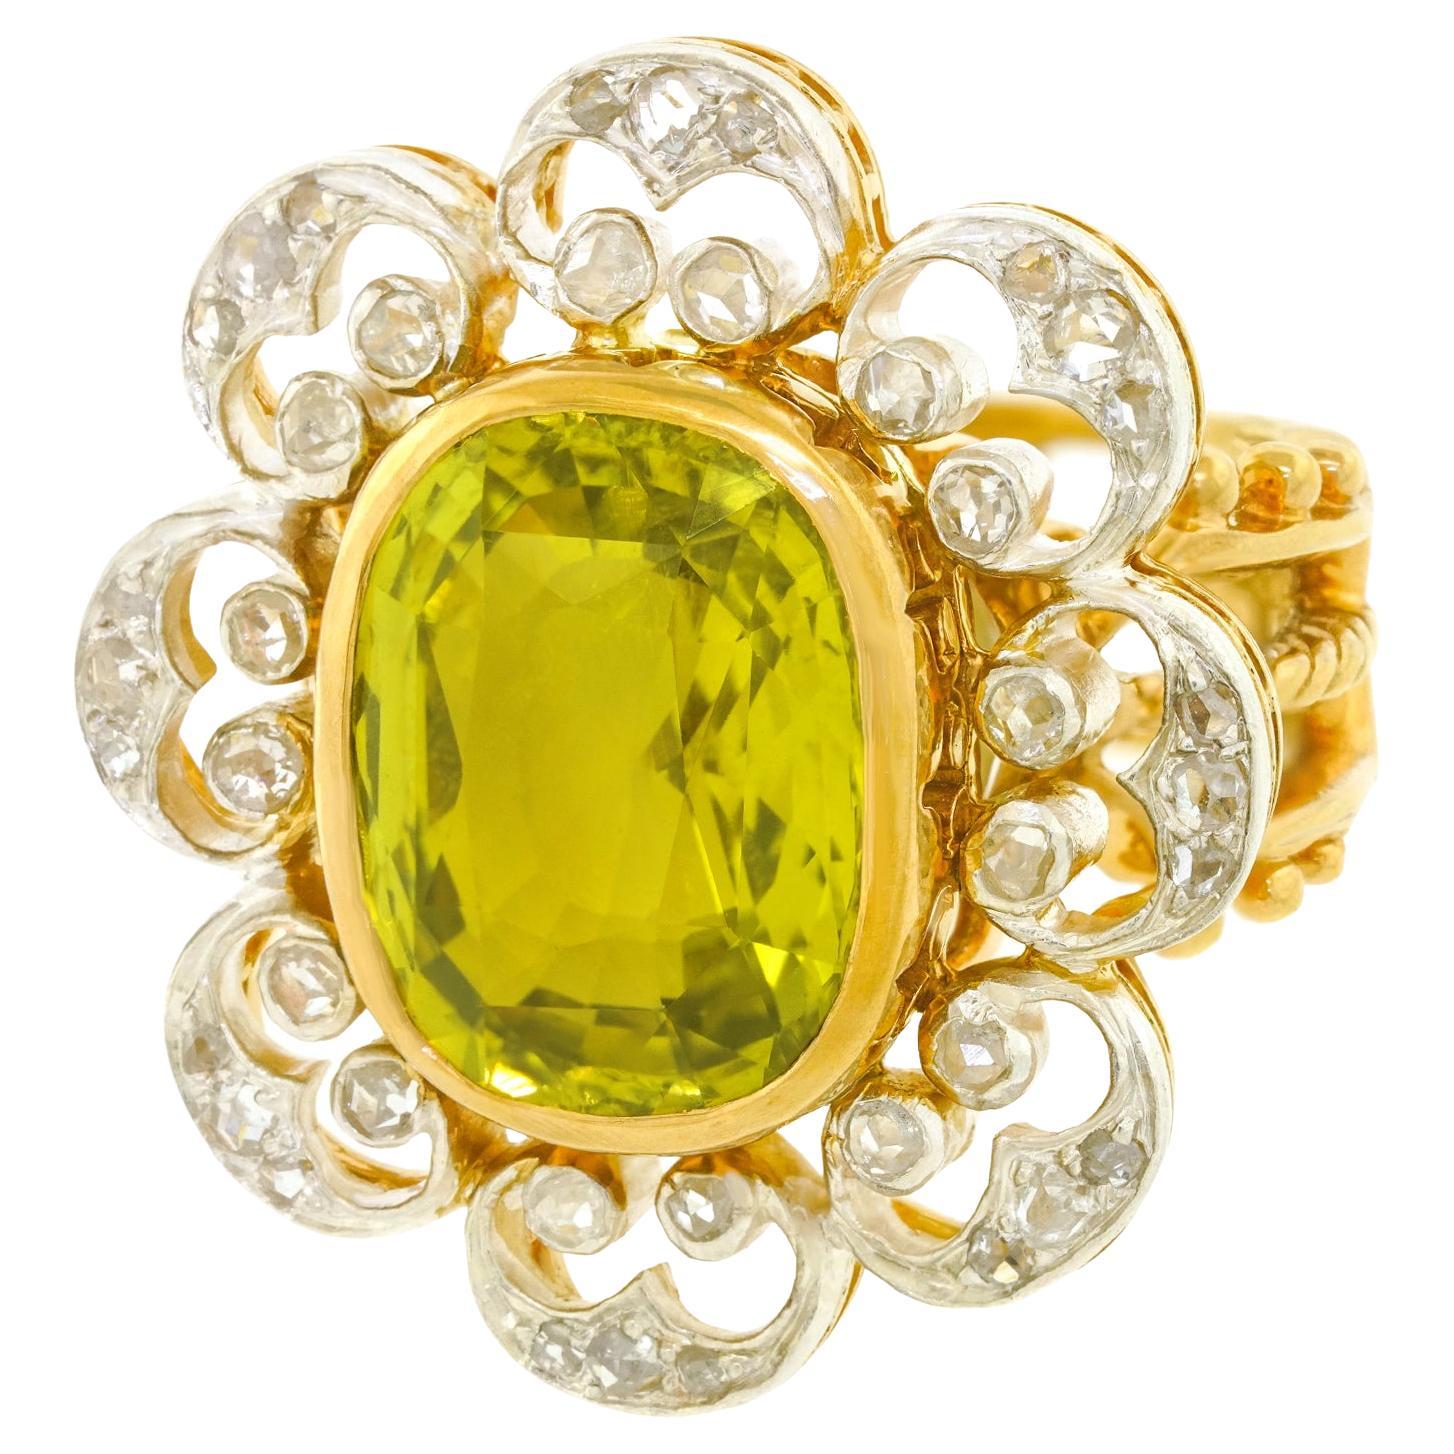 Natural Chrysoberyl in Antique Mounting with Rose-Cut Diamonds GIA